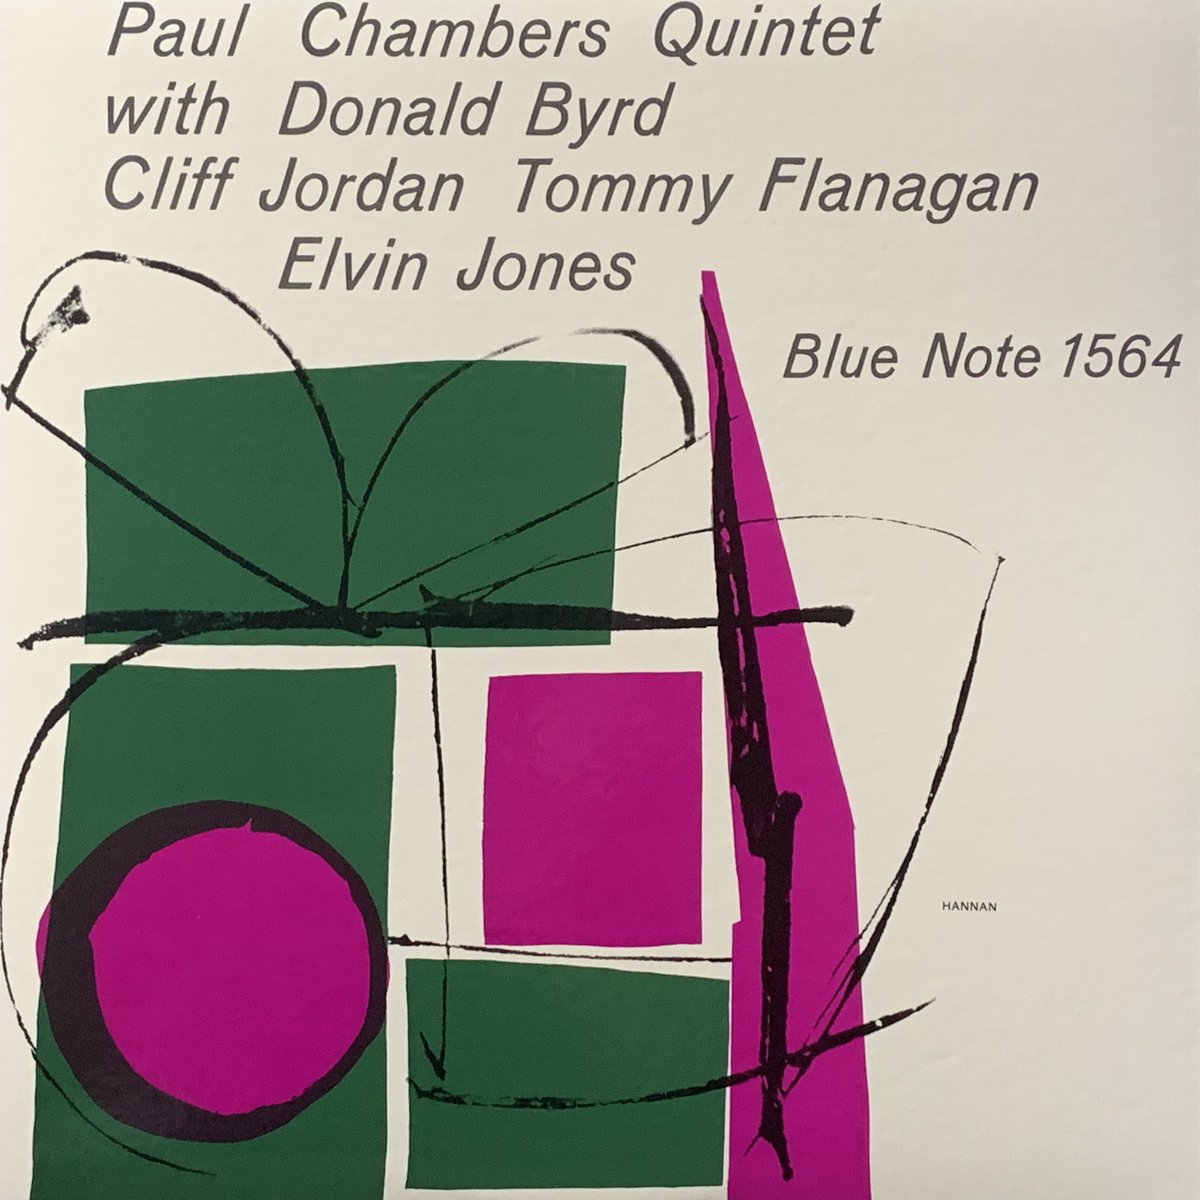 Paul Chambers Quintet Recorded May 19, 1957